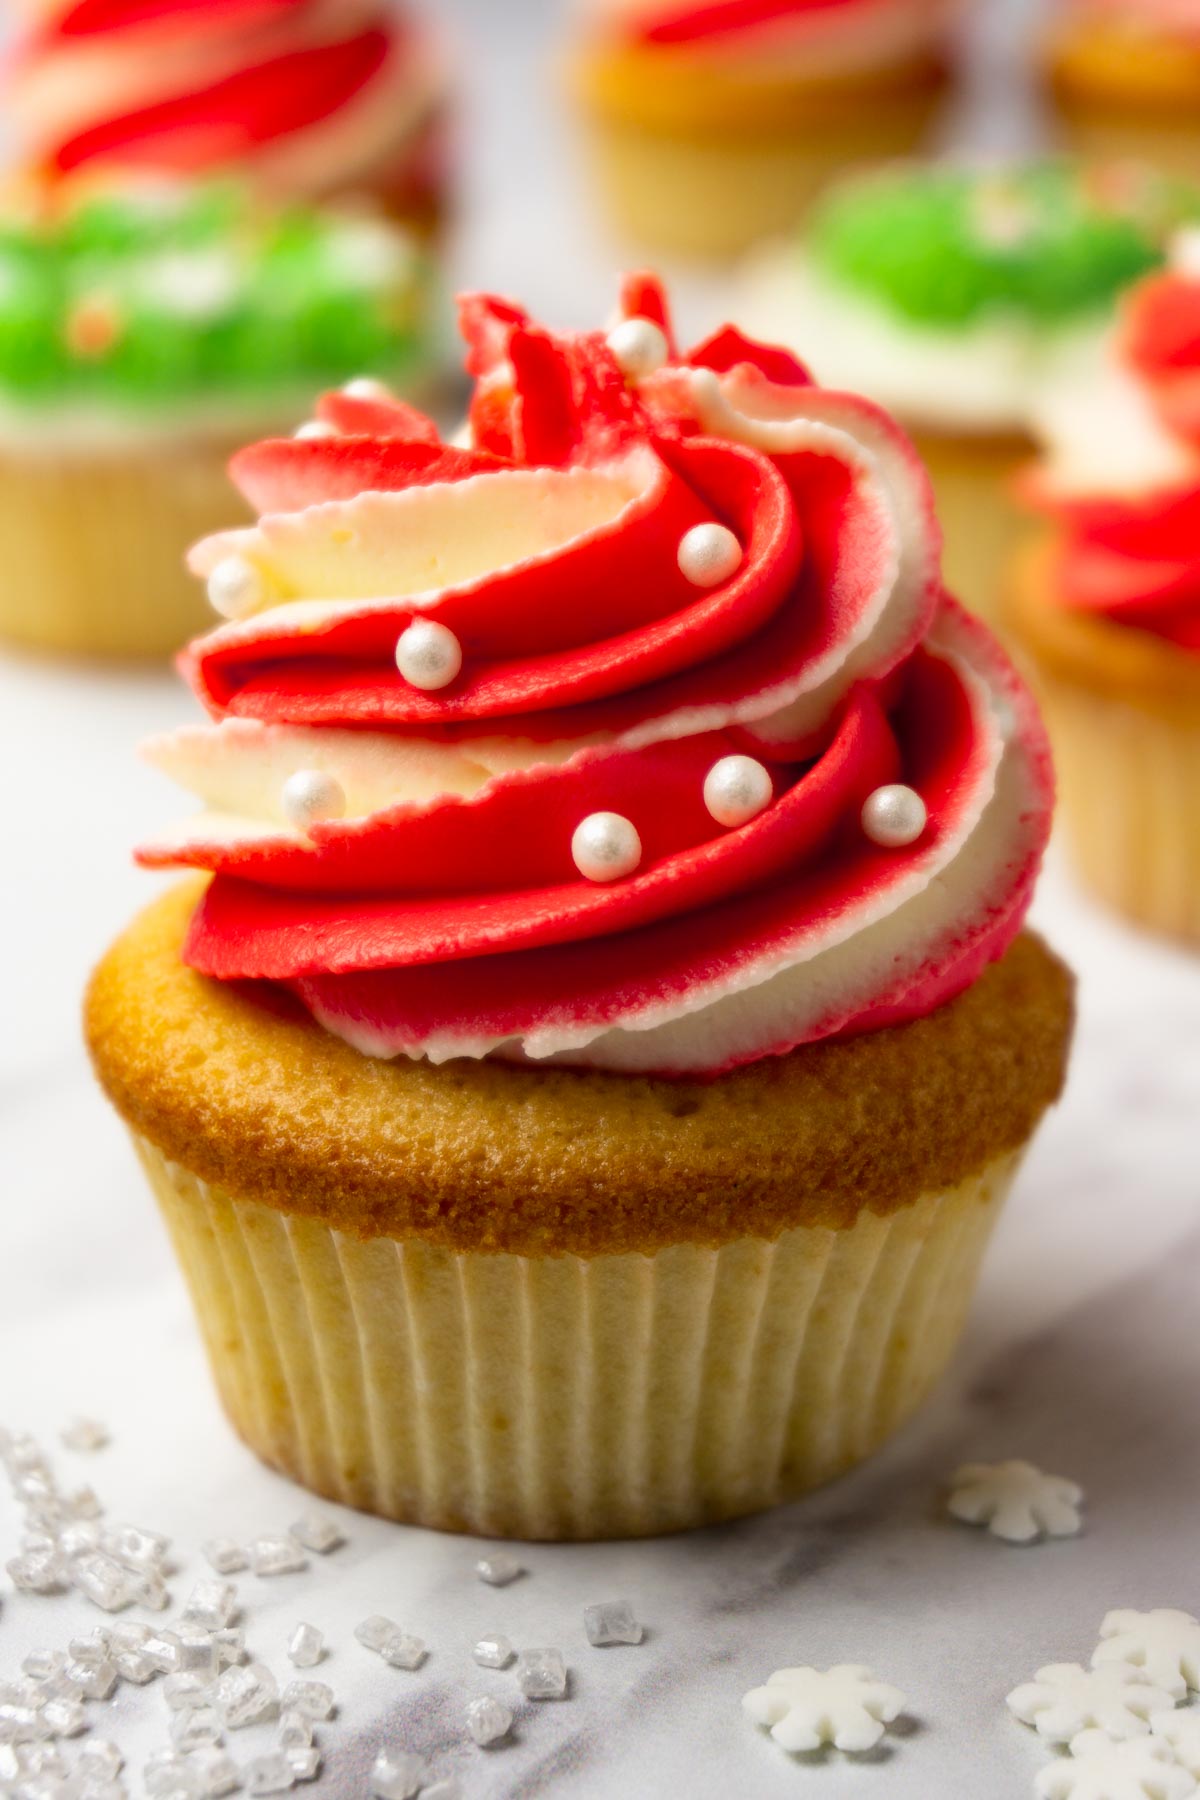 A cupcake decorated with two-tone (red and white) cream cheese frosting and pearl-like sprinkles, more cupcakes on the background.